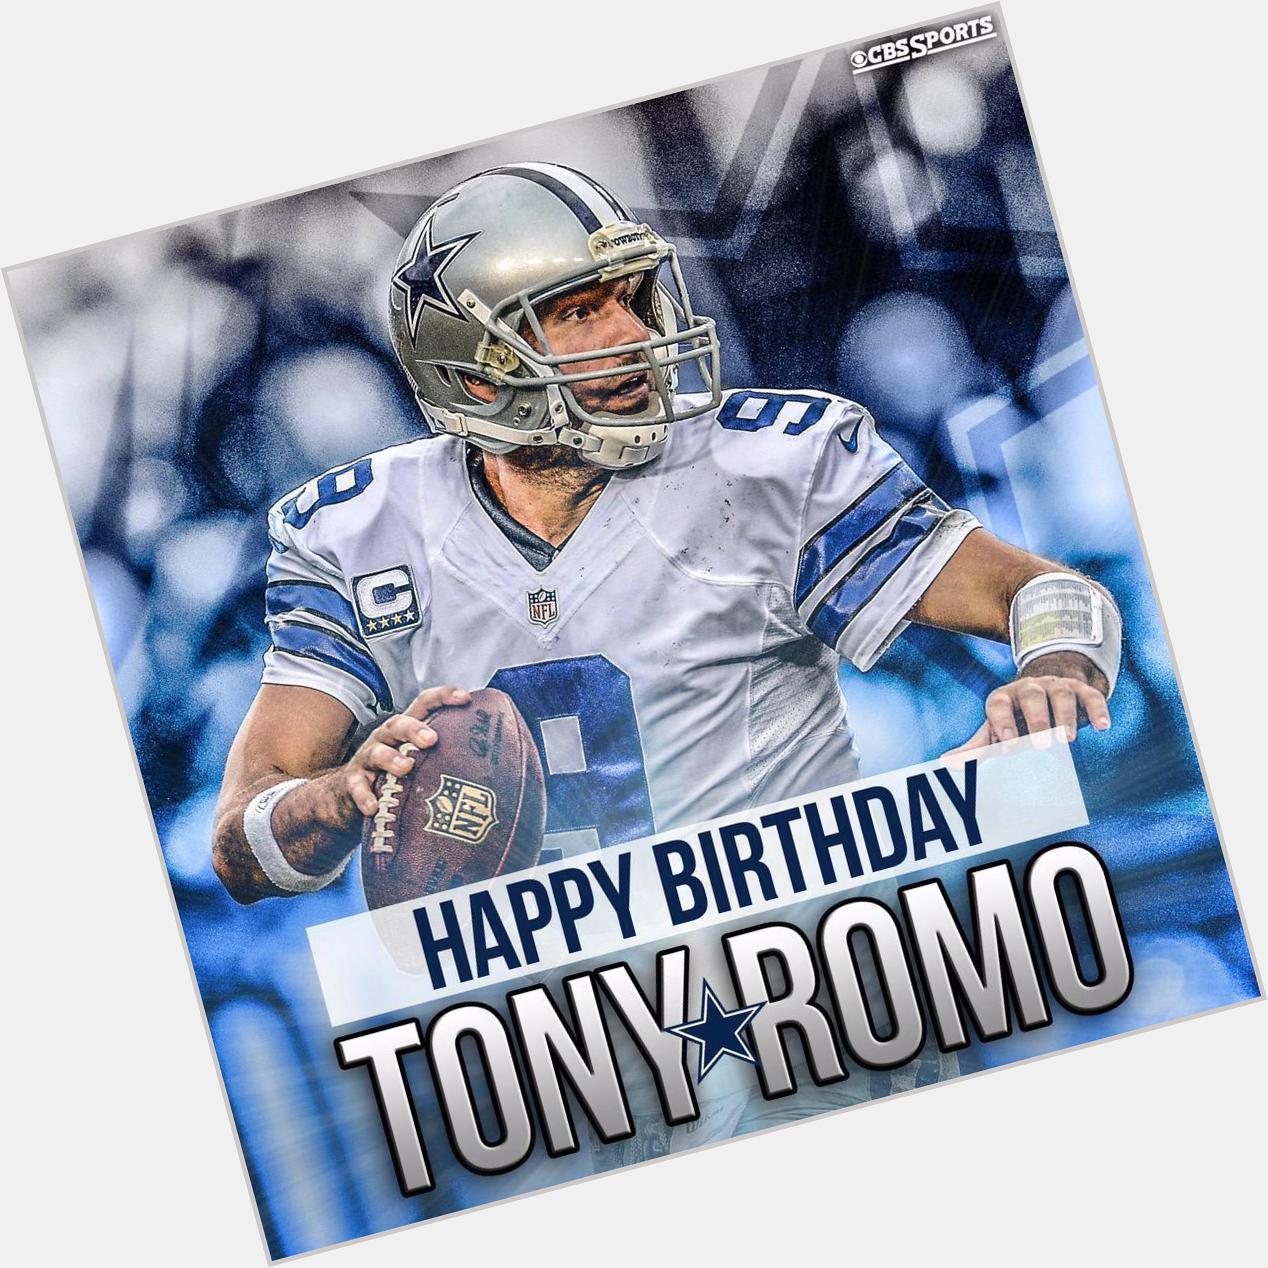 Don\t care what you think of him That\s MY Quarterback! Happy birthday Tony Romo!      